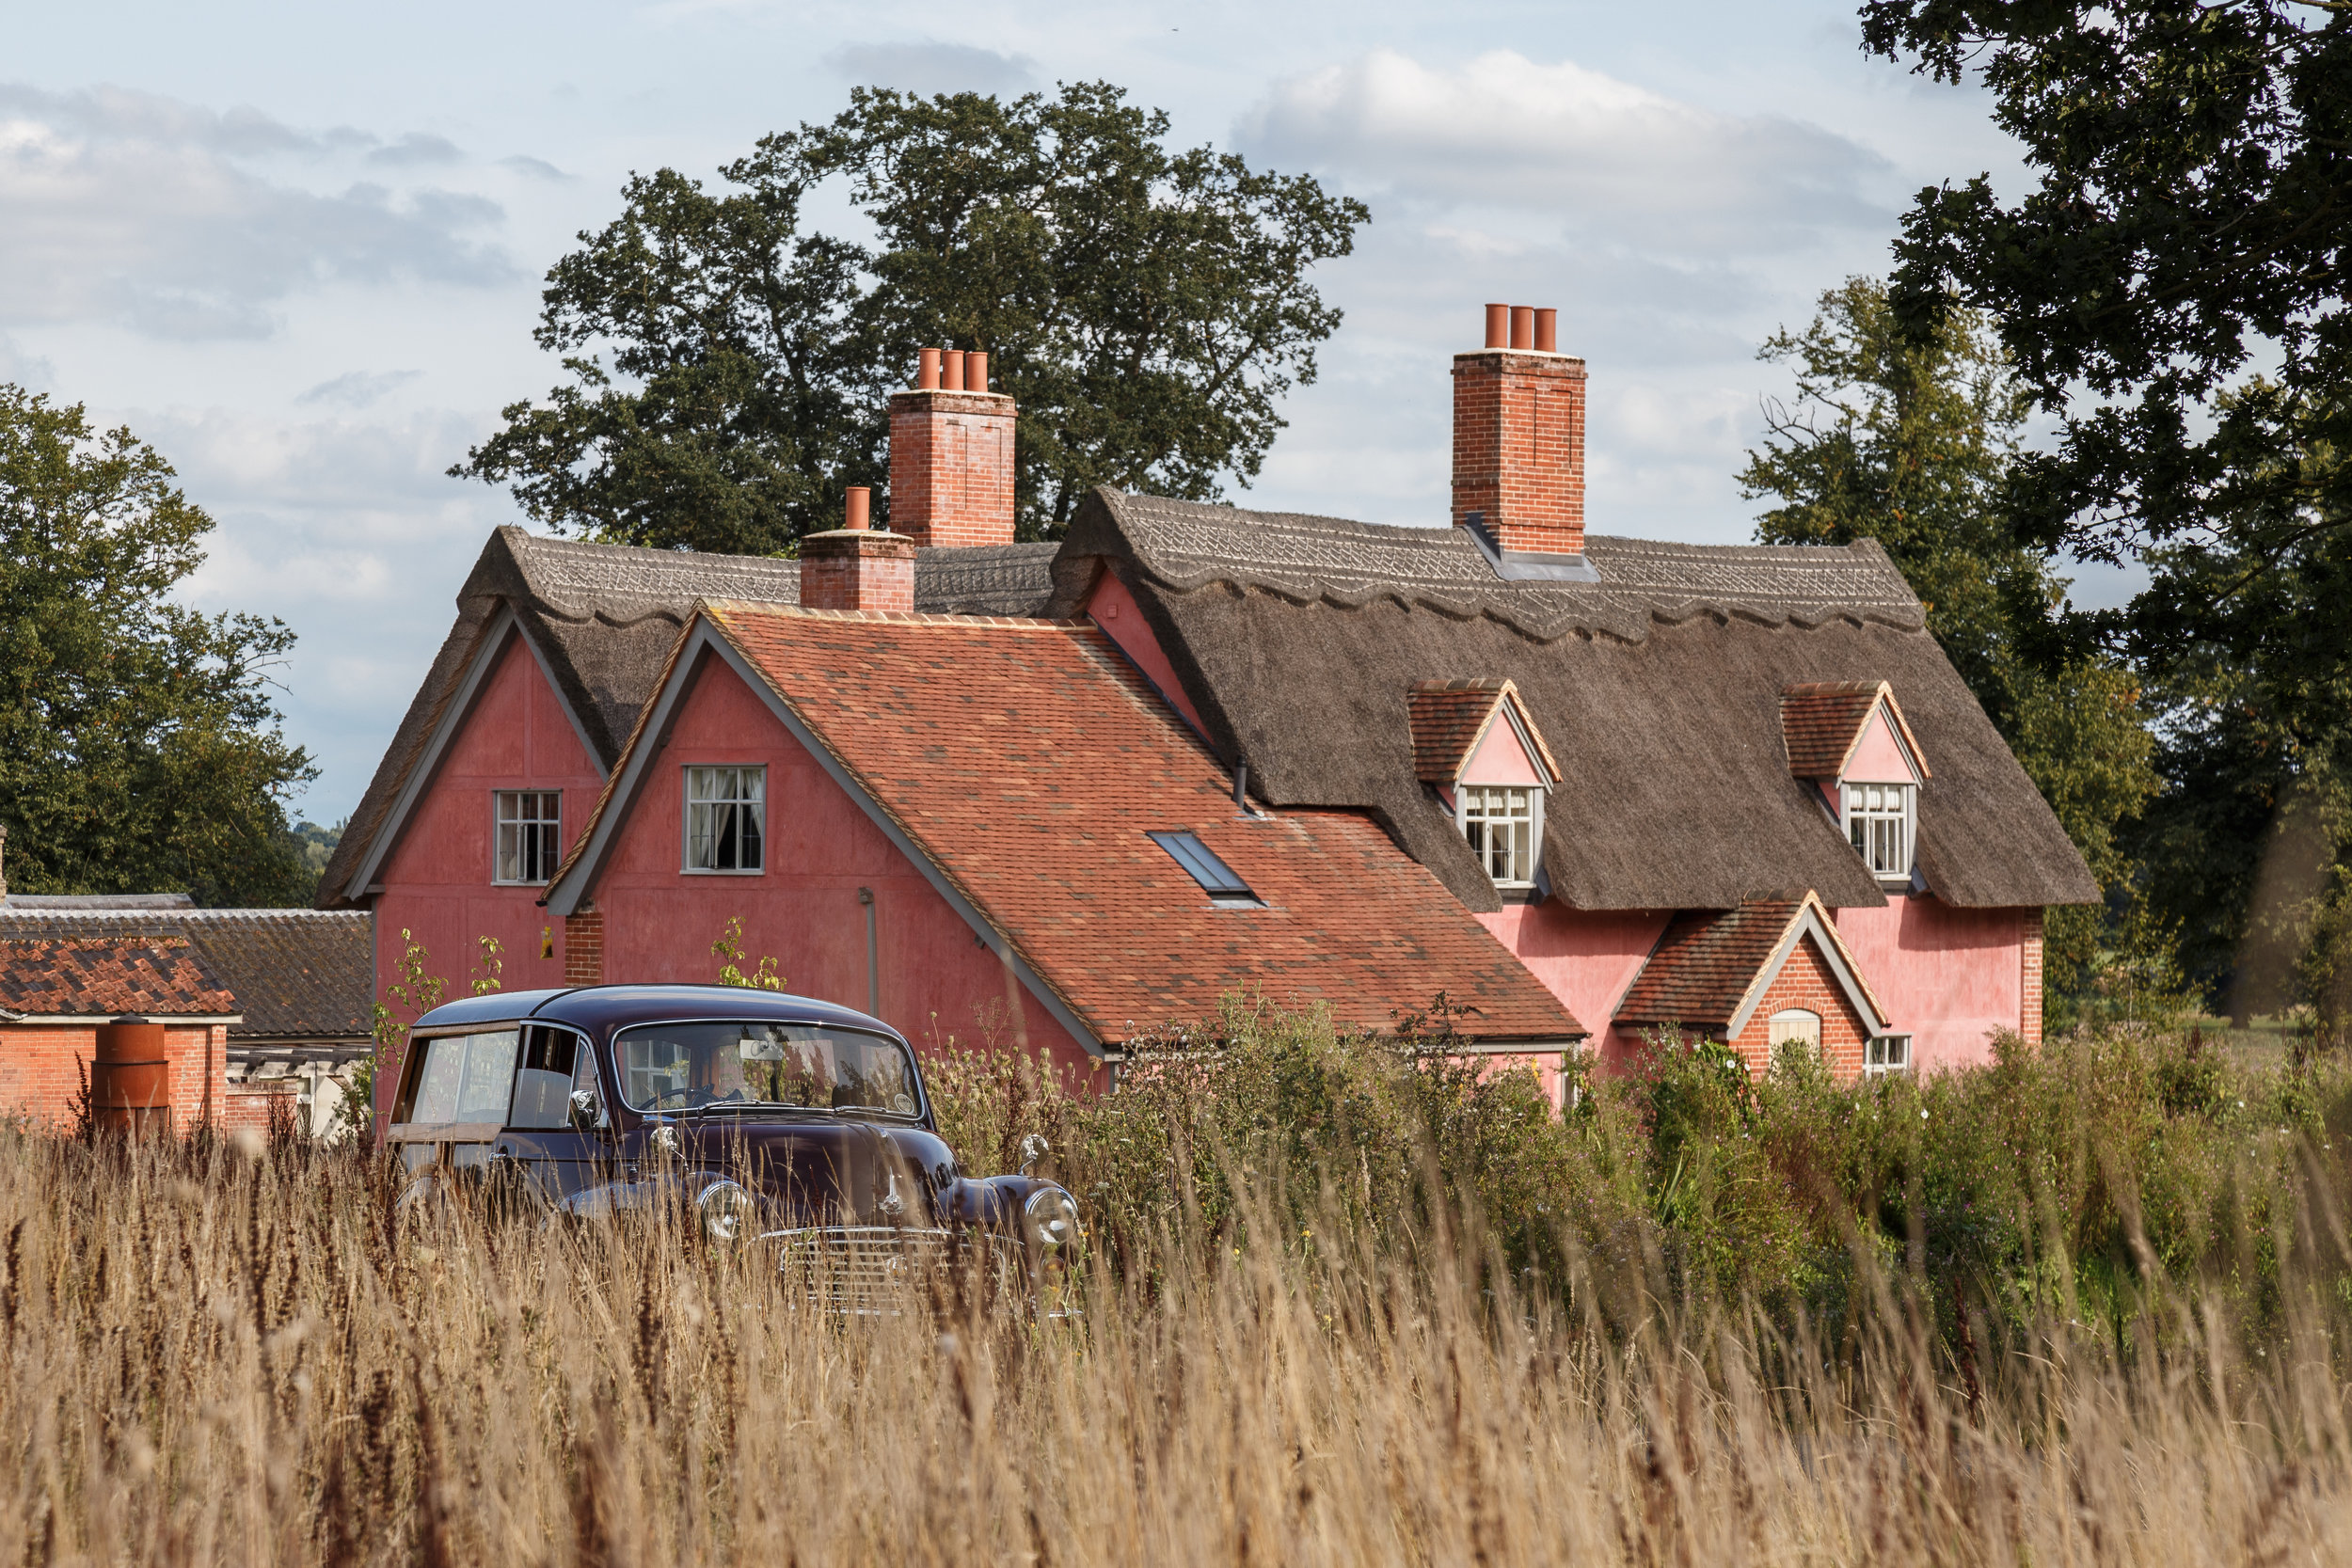 The pink hue of the Farmhouse’s exterior is known as ‘Suffolk Pink’, a finish common to historical homes in the area